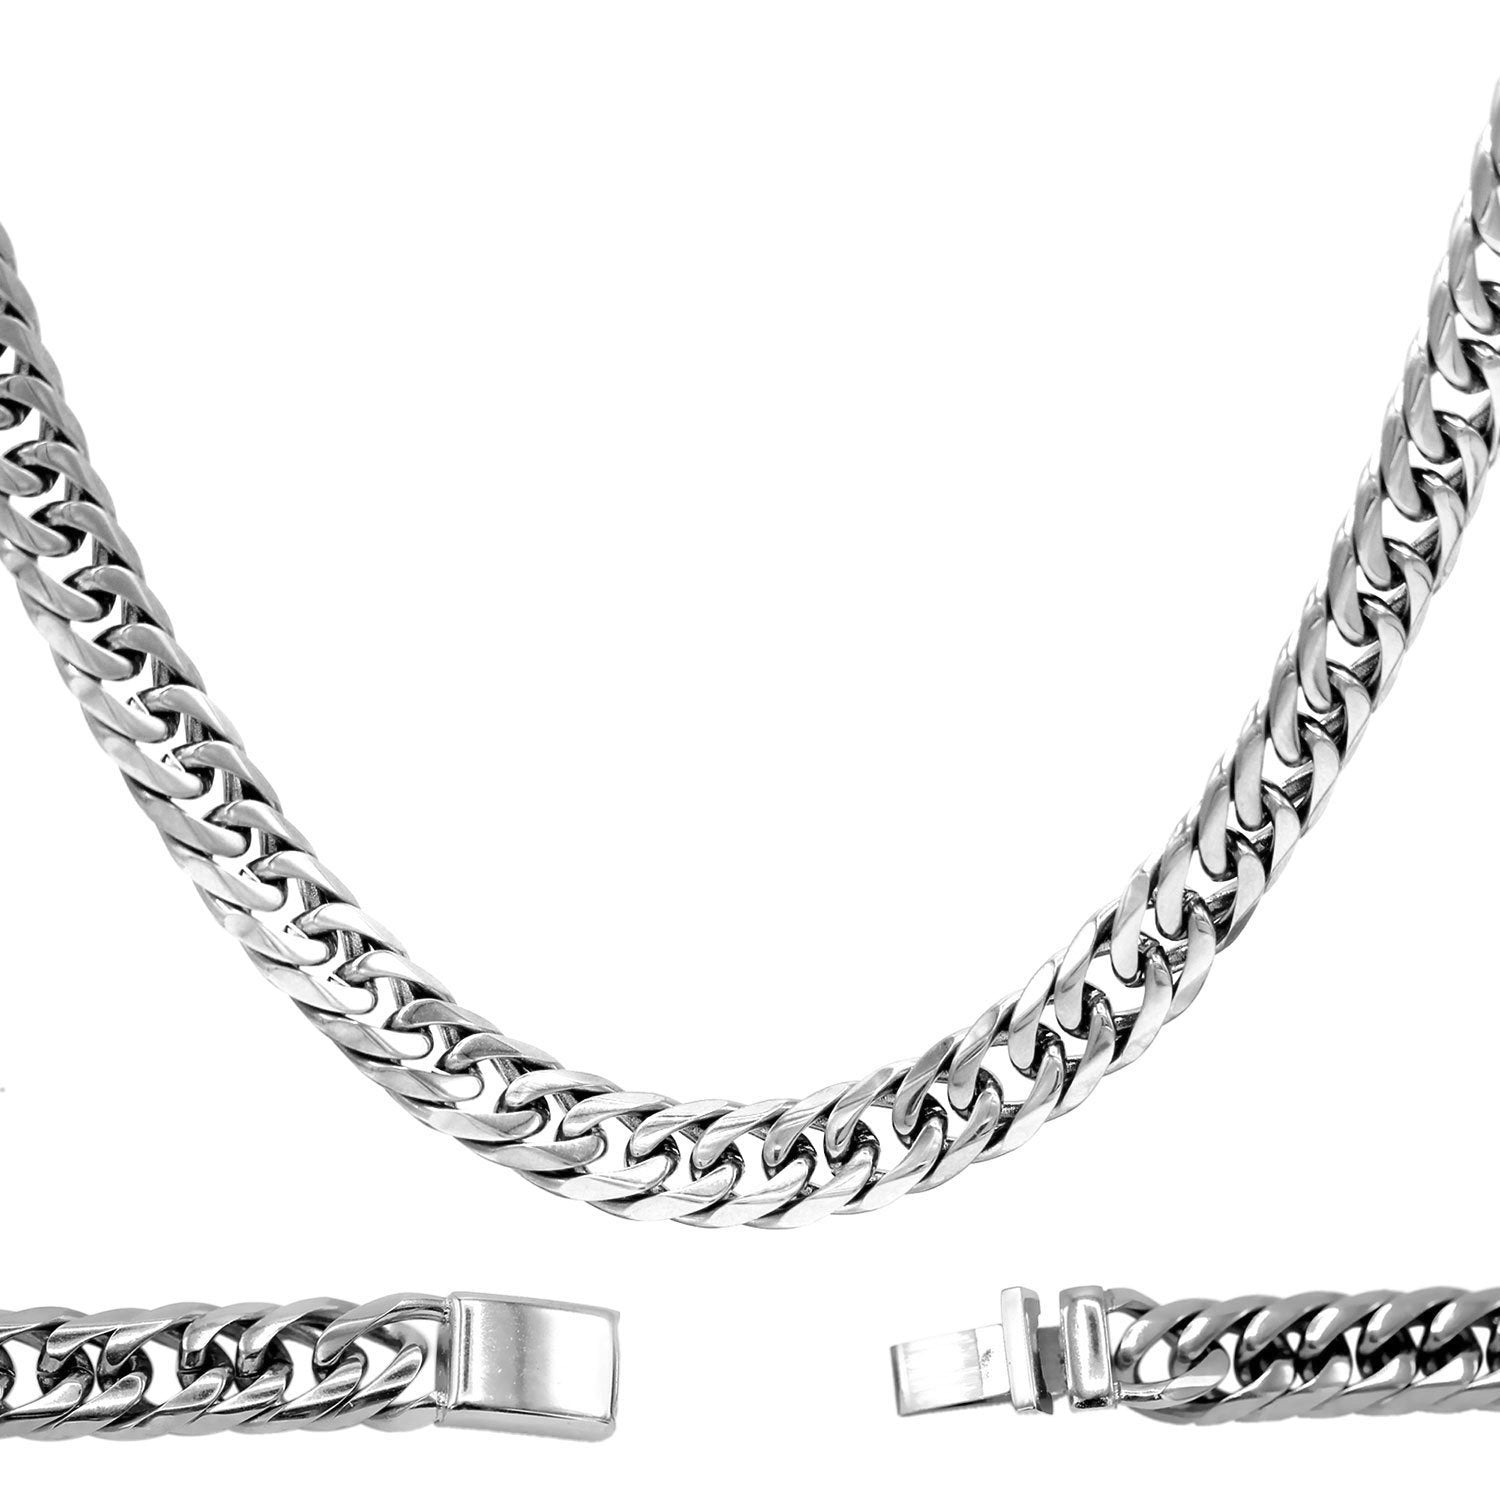 Mens Gold Stainless Steel Square Link Chain Necklace with Cubic Zirconia